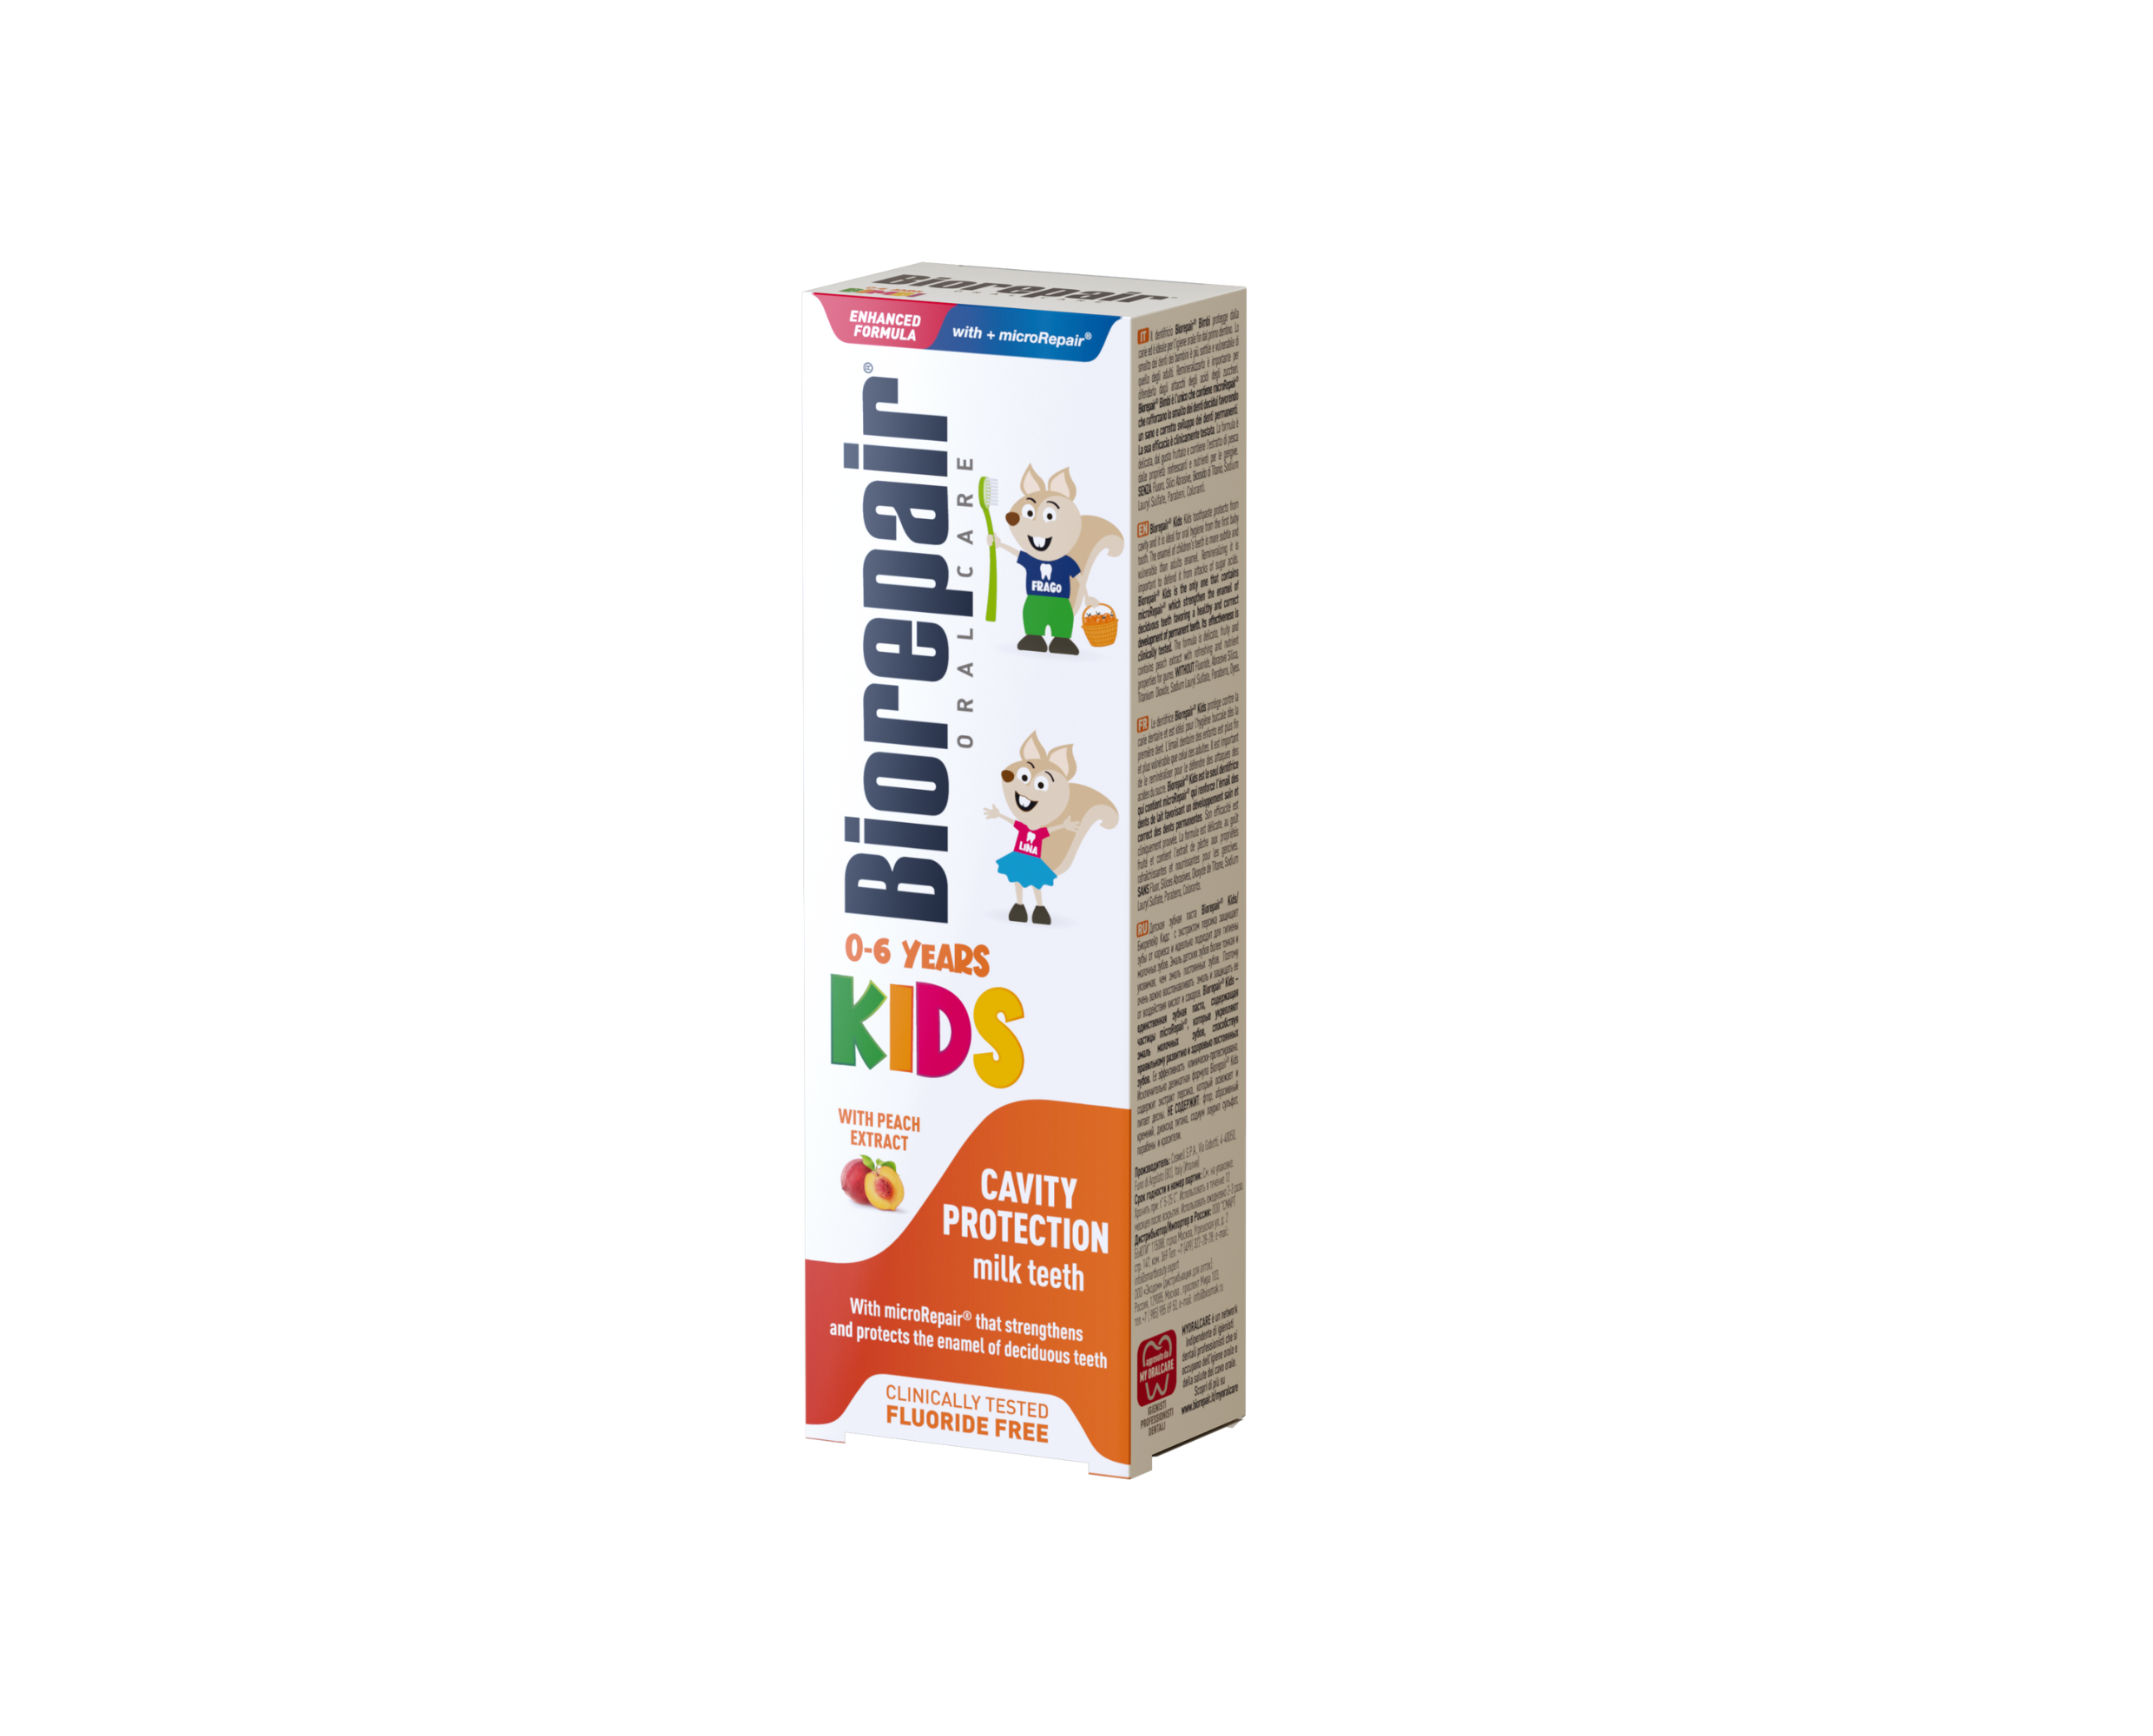 Biorepair® Toothpaste Kids 0/6 age with peach extract